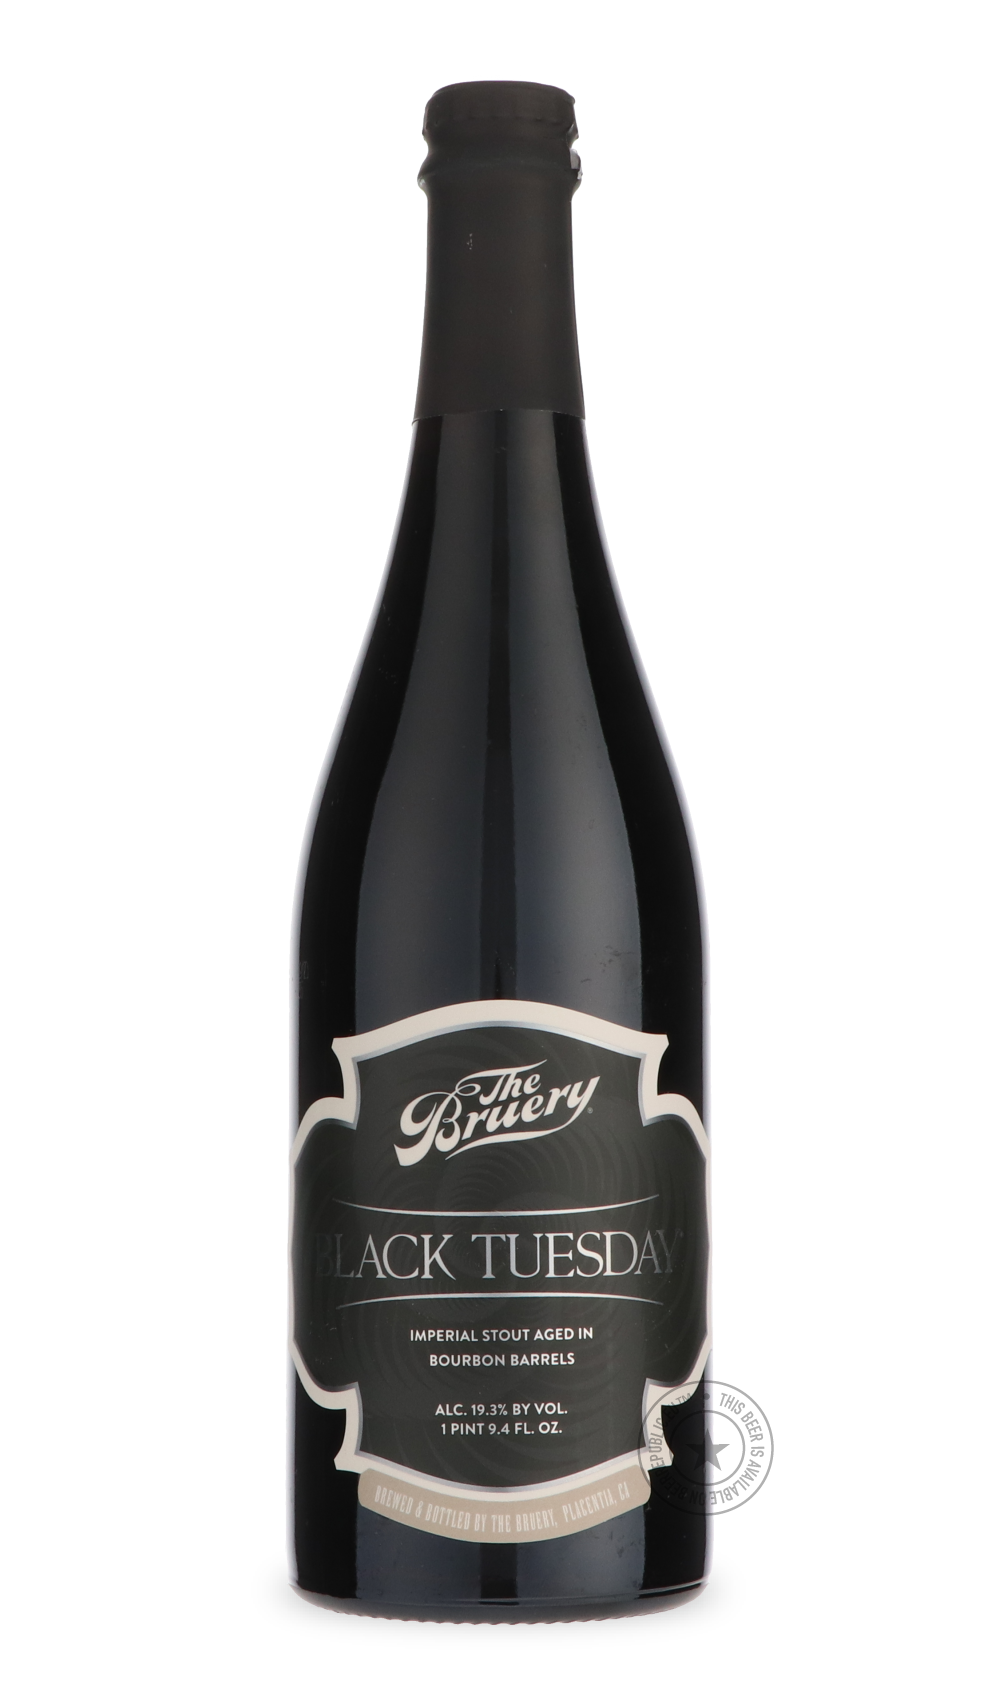 -The Bruery- Black Tuesday (2020)-Stout & Porter- Only @ Beer Republic - The best online beer store for American & Canadian craft beer - Buy beer online from the USA and Canada - Bier online kopen - Amerikaans bier kopen - Craft beer store - Craft beer kopen - Amerikanisch bier kaufen - Bier online kaufen - Acheter biere online - IPA - Stout - Porter - New England IPA - Hazy IPA - Imperial Stout - Barrel Aged - Barrel Aged Imperial Stout - Brown - Dark beer - Blond - Blonde - Pilsner - Lager - Wheat - Weize